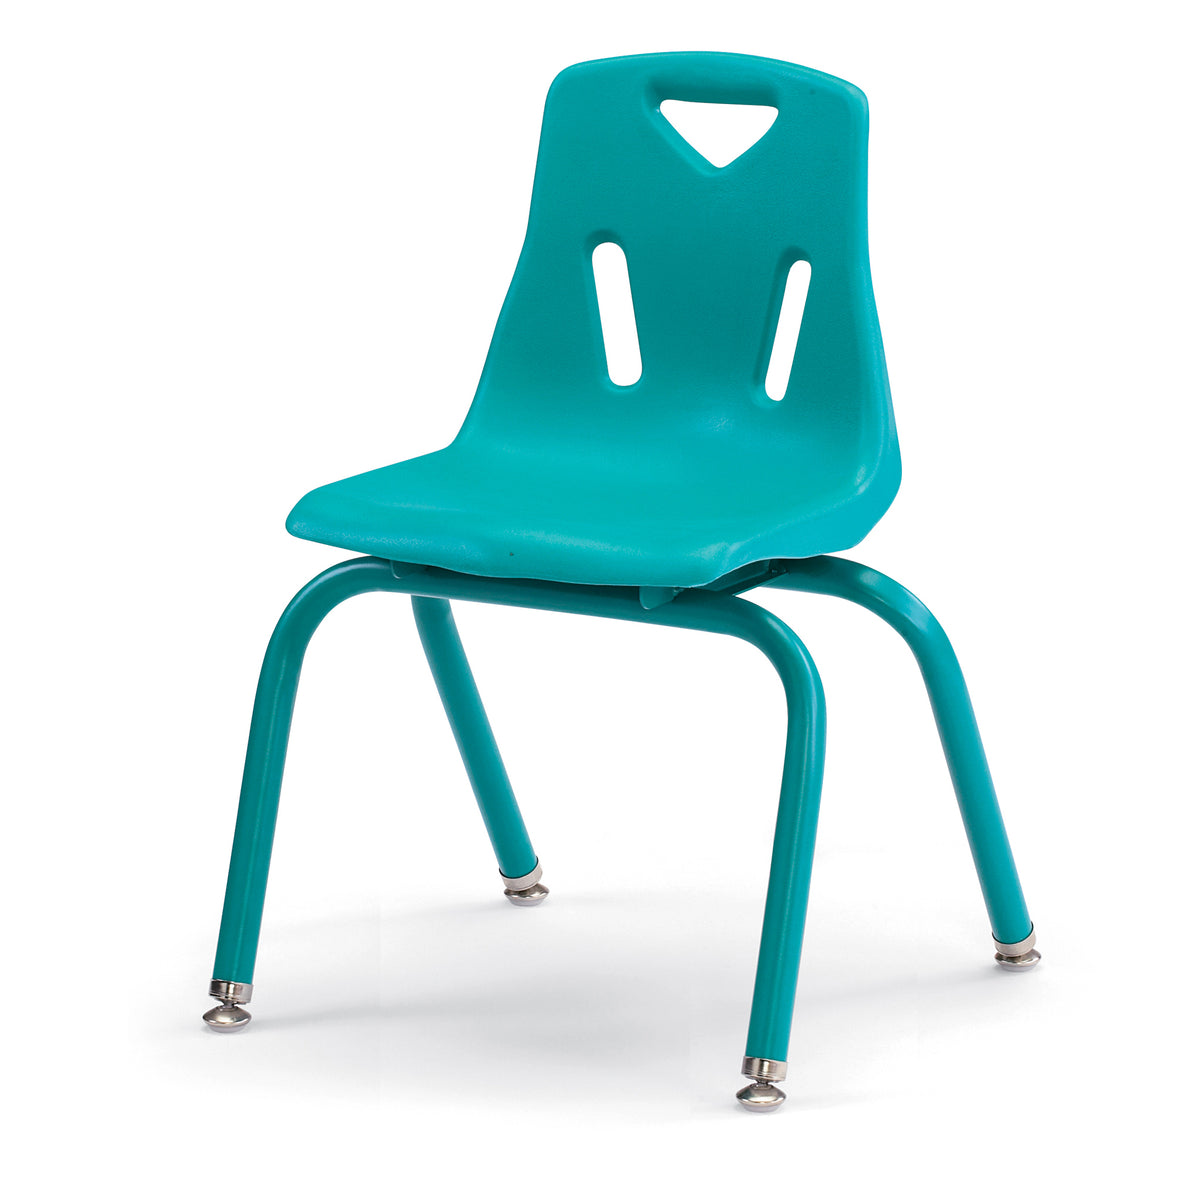 8124JC1005, Berries Stacking Chair with Powder-Coated Legs - 14" Ht - Teal